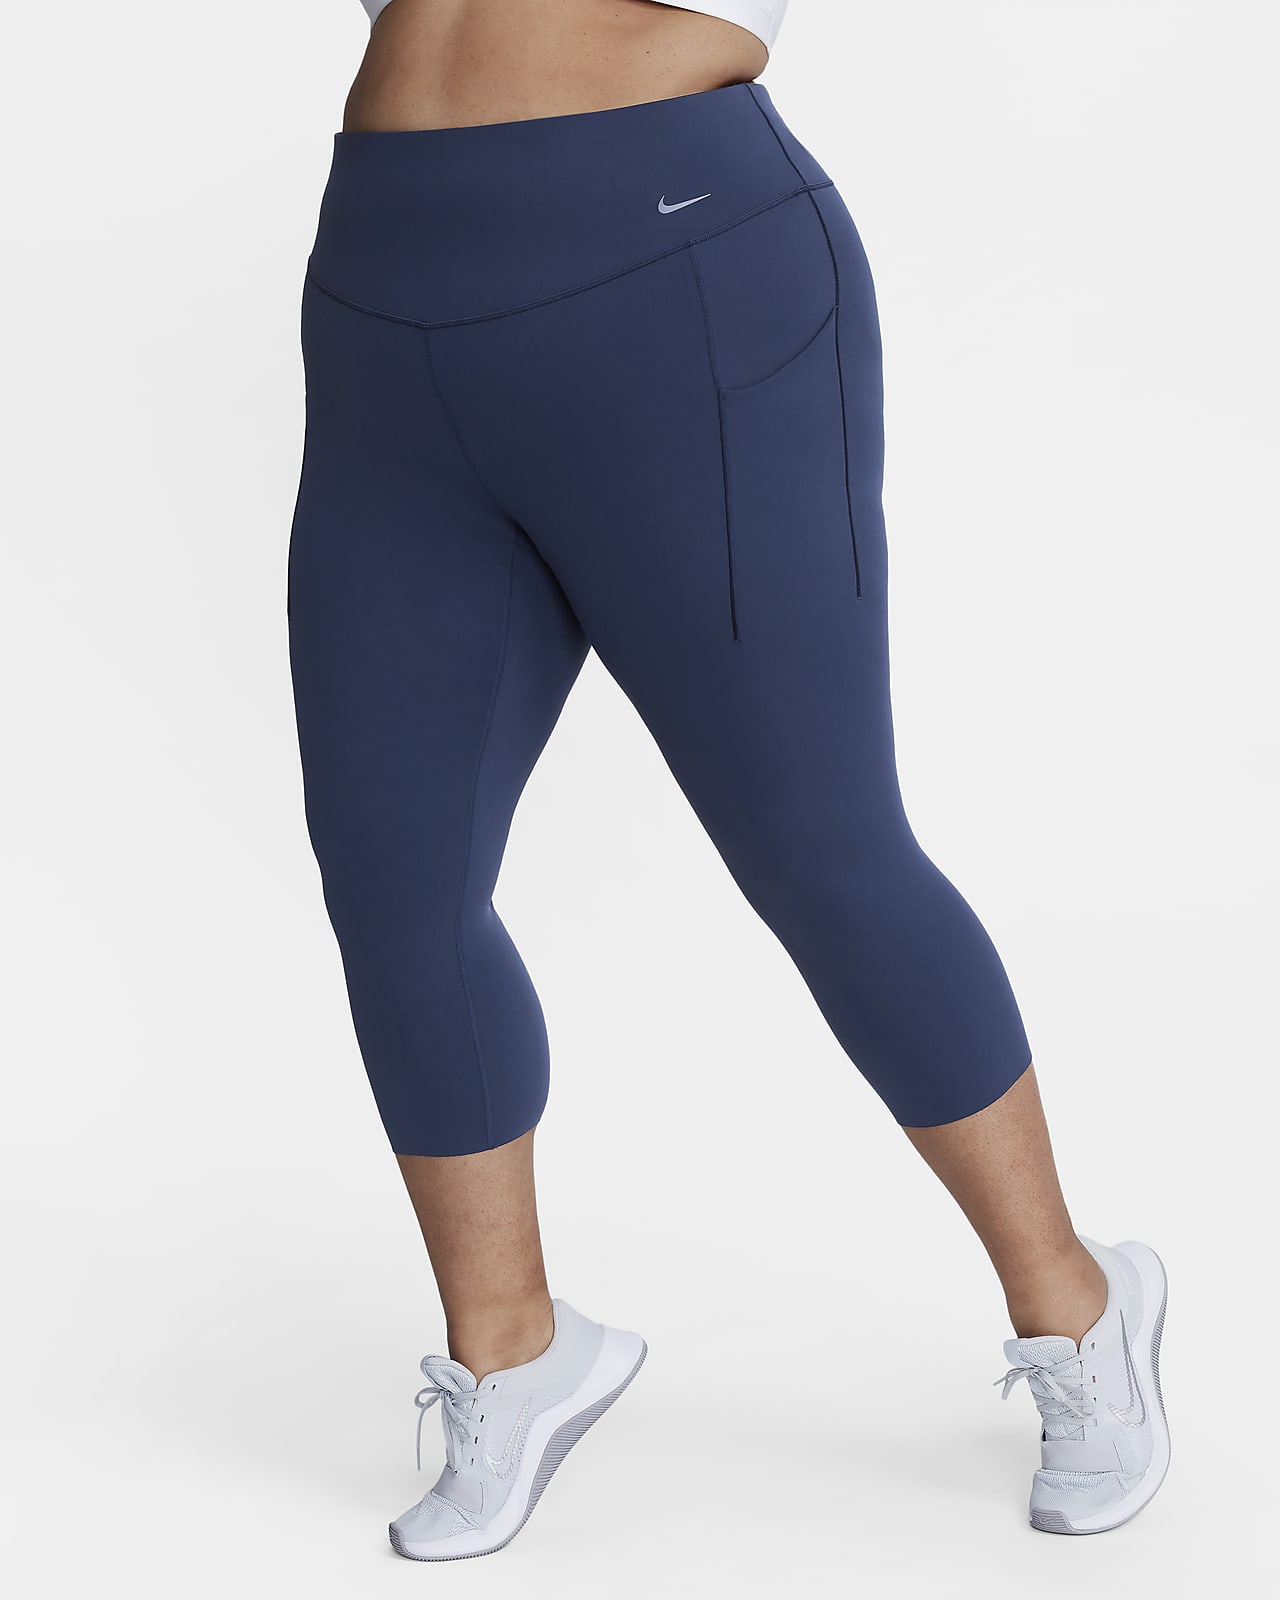 TomboyX Workout Leggings, 7/8 Length High Waisted Active Yoga Pants With  Pockets For Women, Plus Size Inclusive (XS-6X) Embrace The Curve X Small